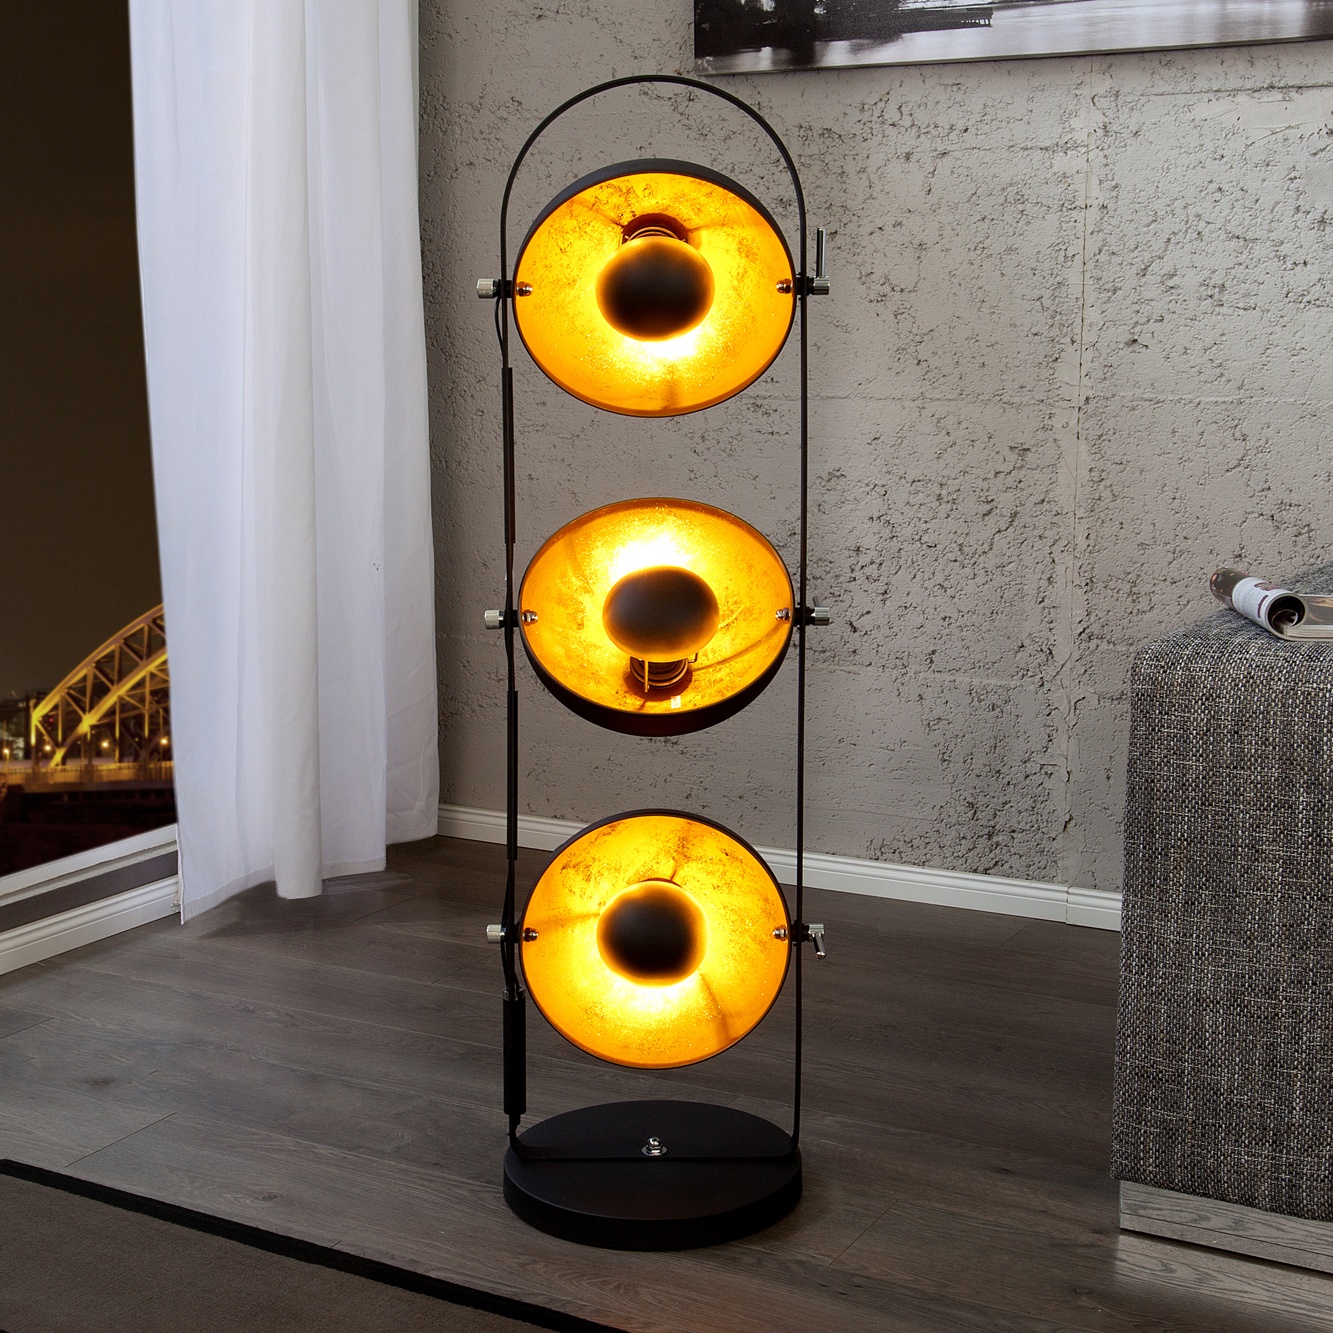 Studio style lamp with adjustable black and gold spots